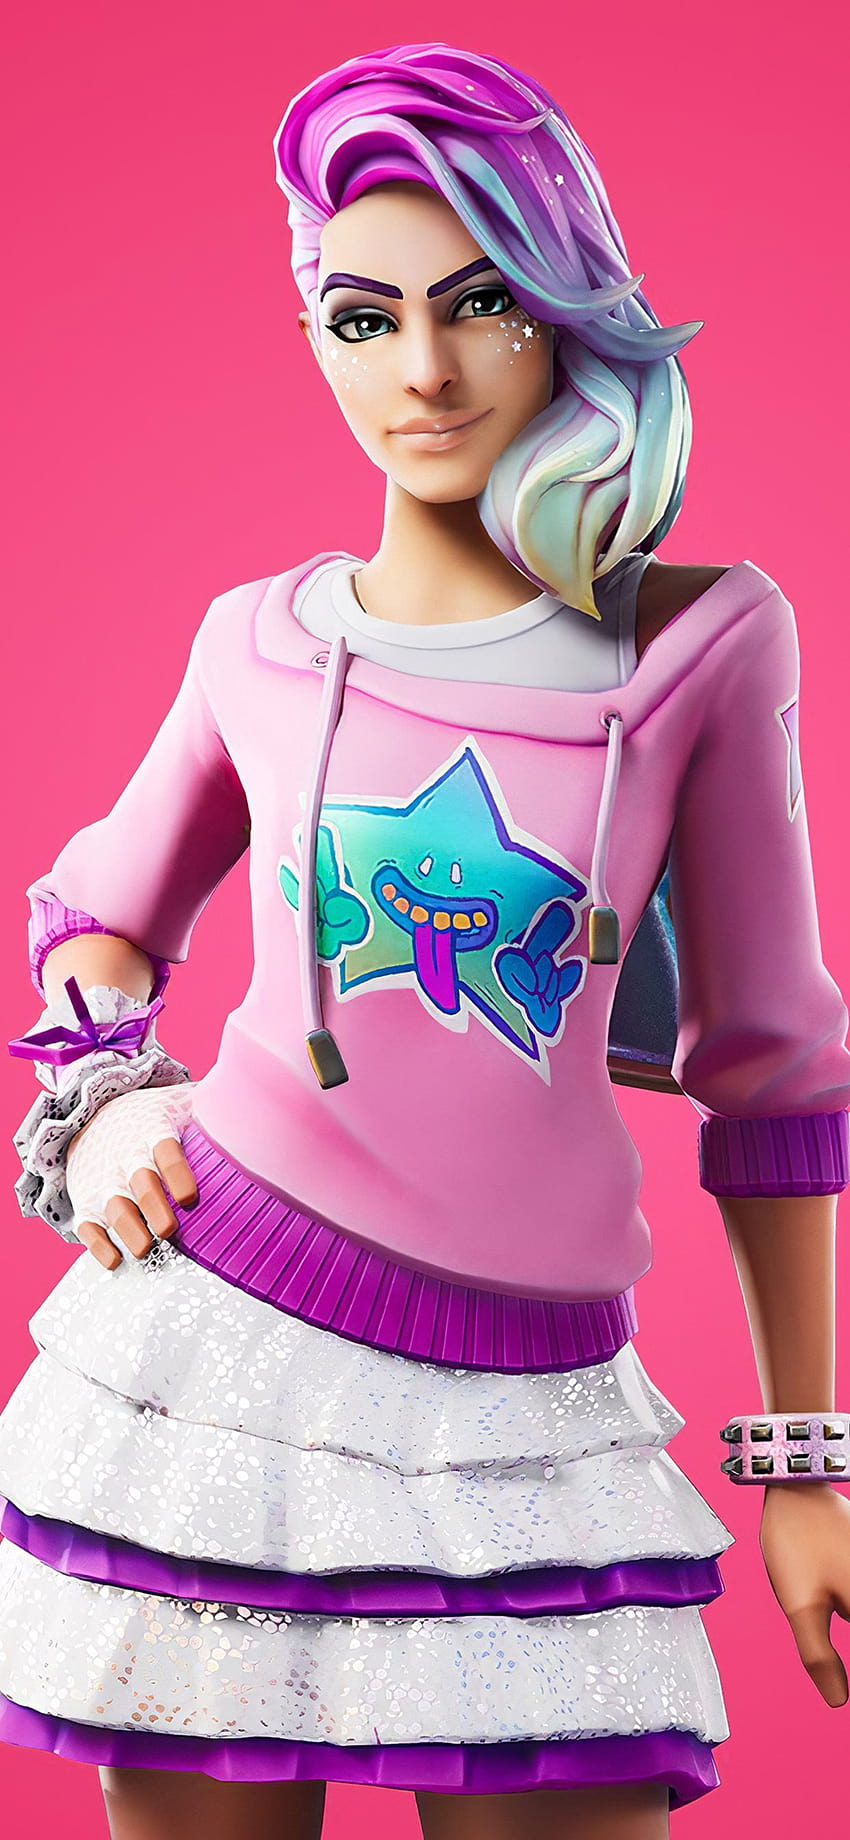 fortnite chapter two starlie outfit iPhone X, fortnite girls iphone HD phone wallpaper